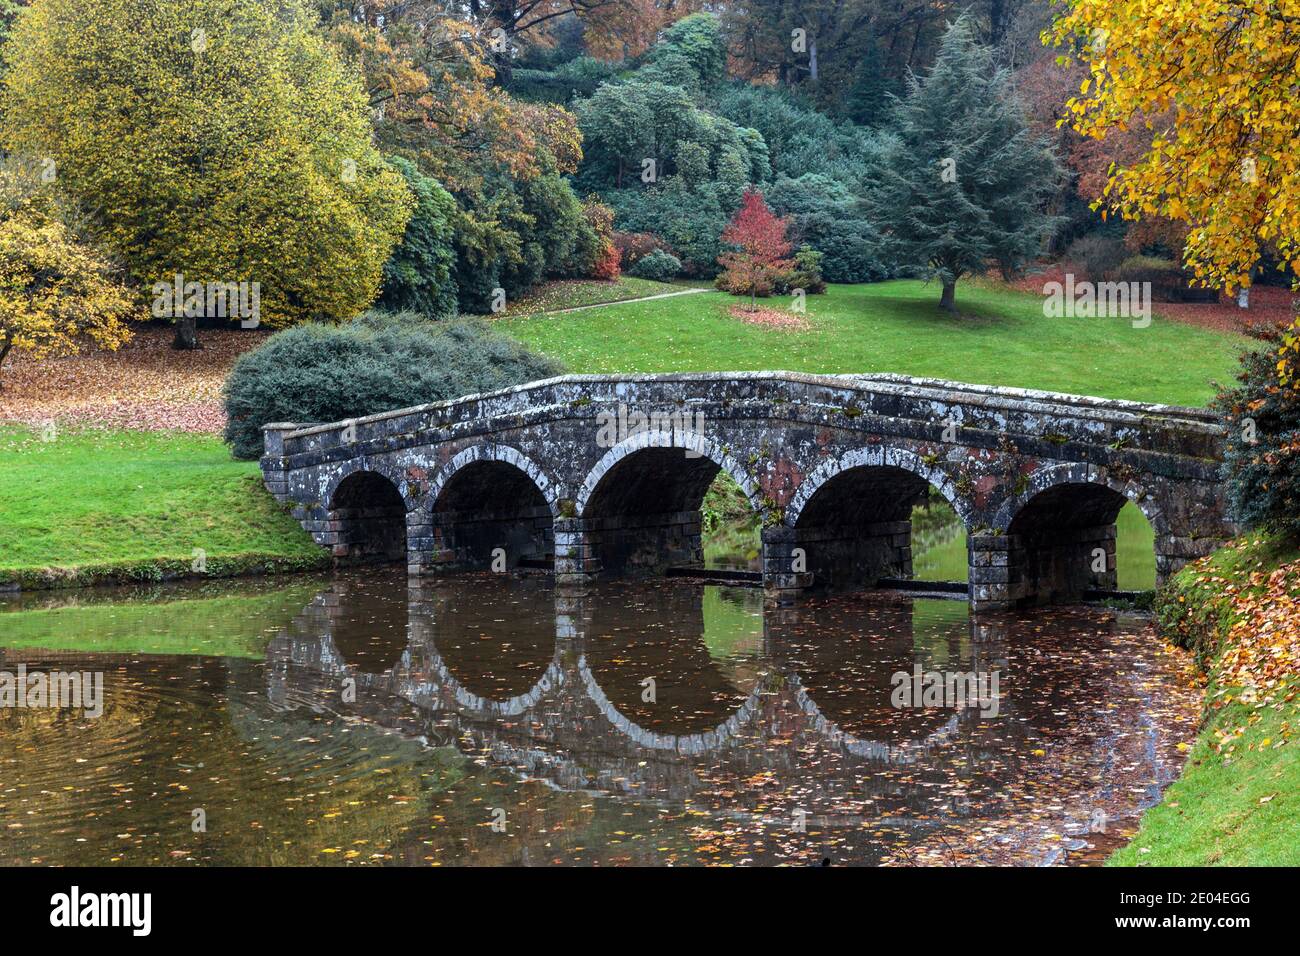 The five arch Palladian bridge at Stourhead in Wiltshire, England. Stock Photo